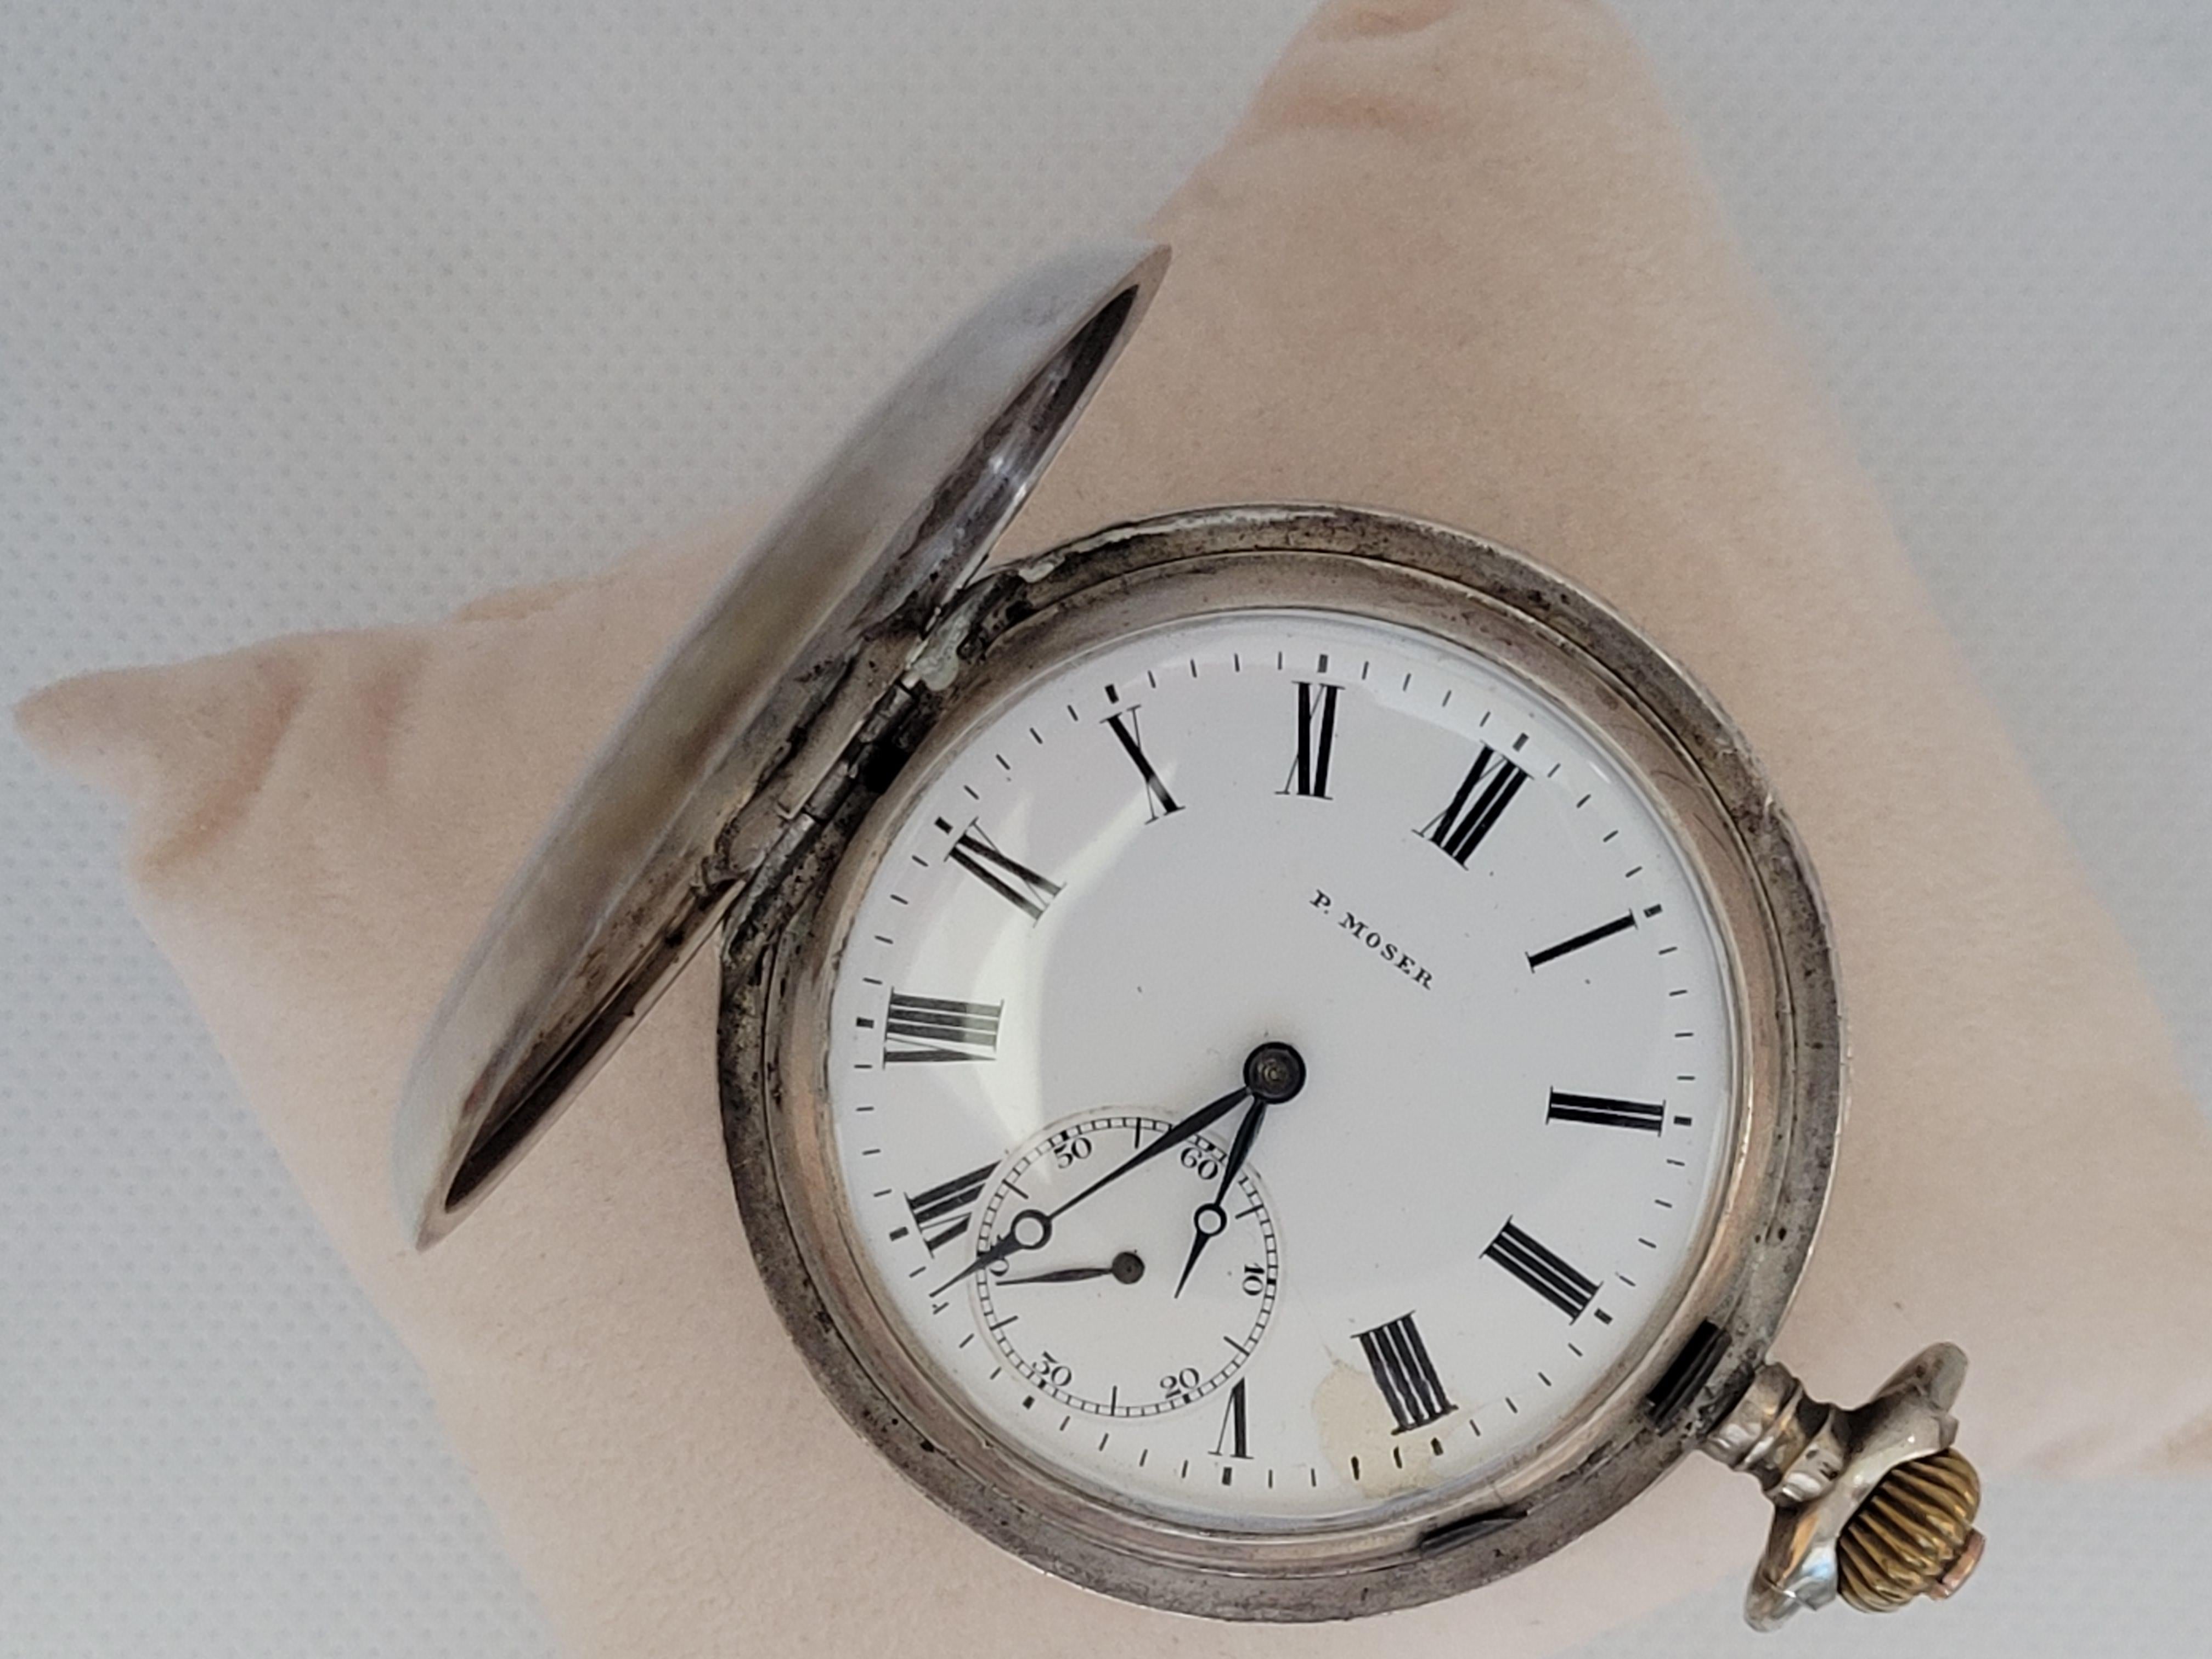 P Moser Pocket Watch Working Case Year 1910 Swiss Made 875 Silver In Good Condition For Sale In Rancho Santa Fe, CA